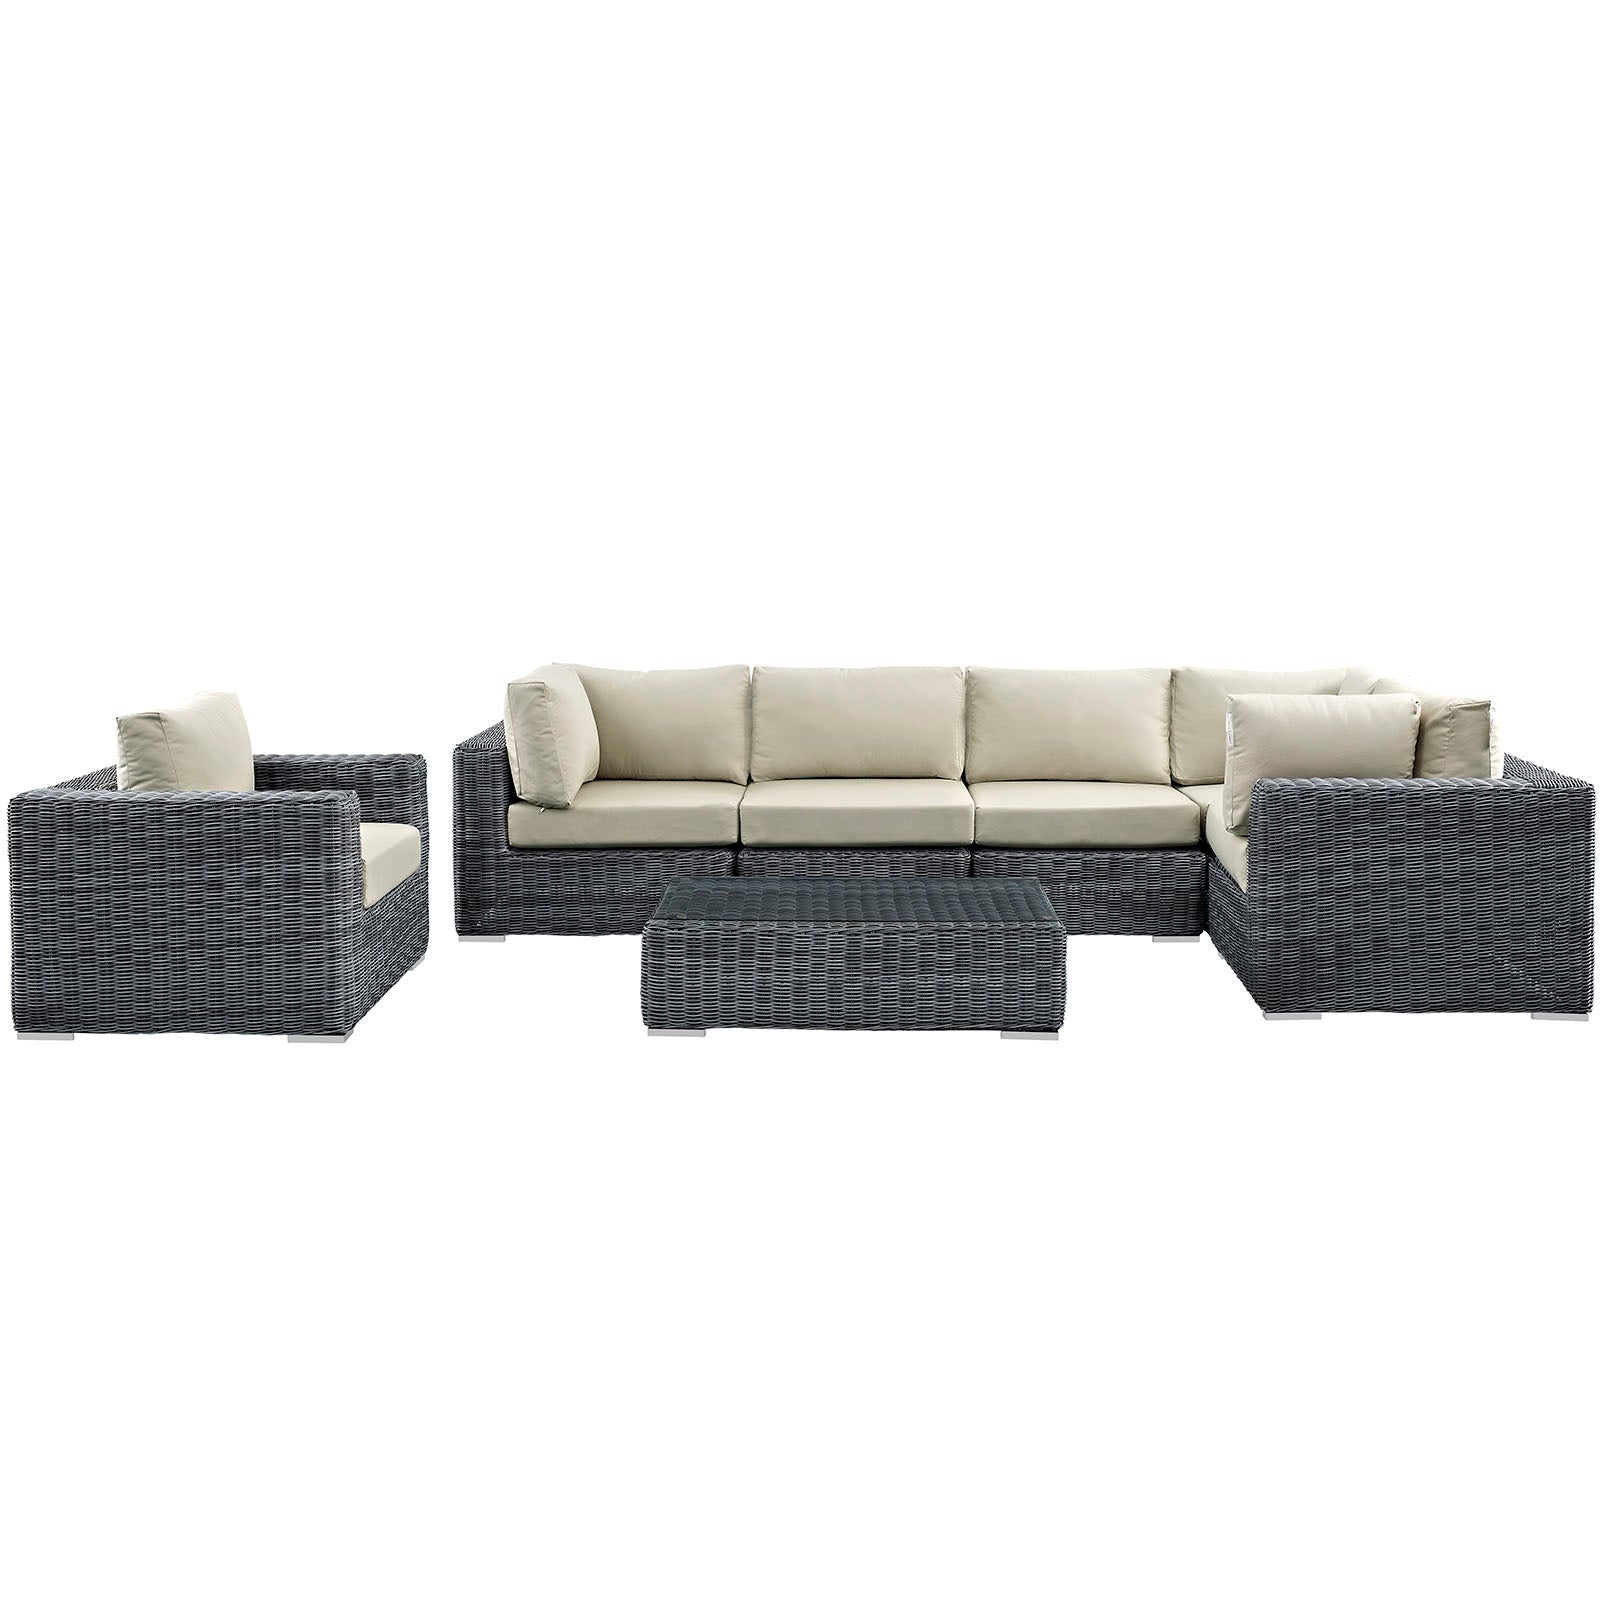 Summon 7 Piece Outdoor Patio Sunbrella® Sectional Set-Outdoor Sectional-Modway-Wall2Wall Furnishings